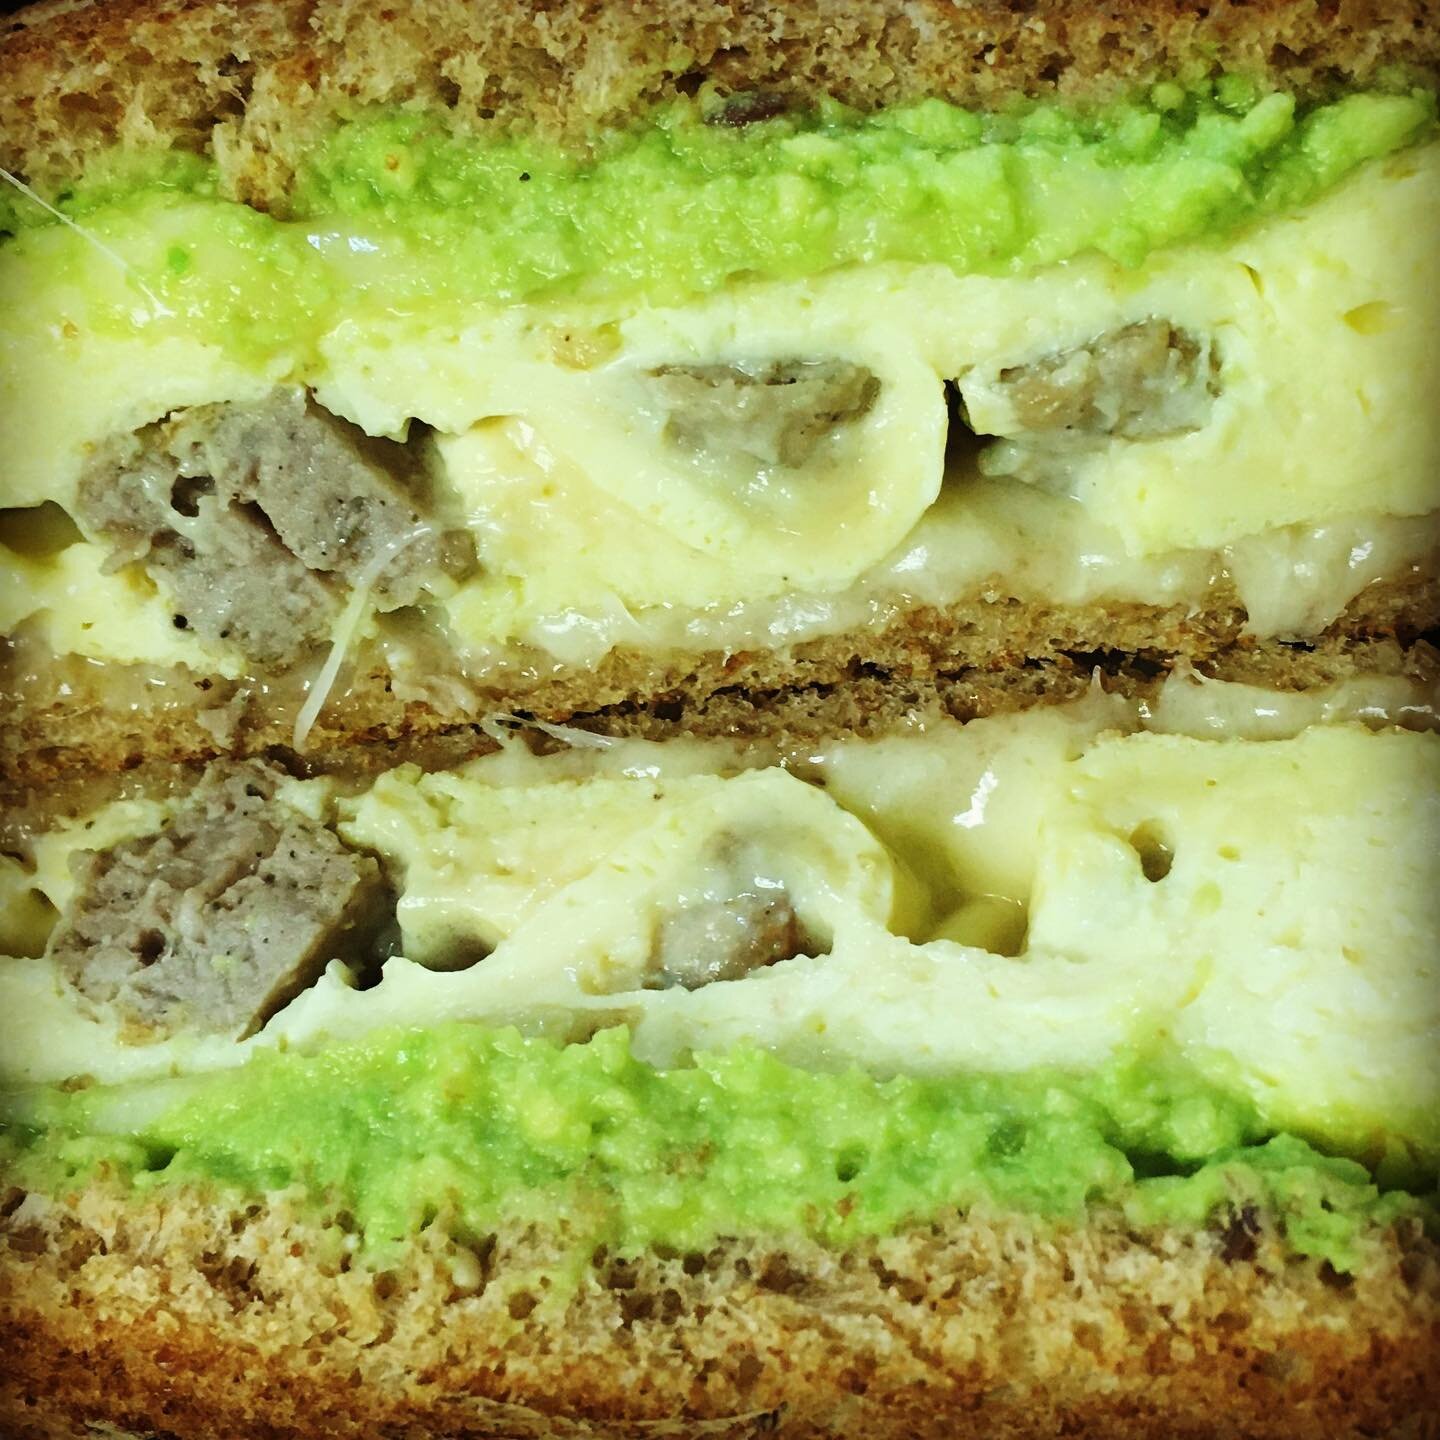 Egg, sausage, swiss cheese and avocado on wheat toast from @sadierosebakingco What are YOU having for breakfast? #breakfast #eggs #eggsandwich #swisscheese #avocado #sandiego #sandiegofood #sandiegorestaurants #localbusiness #local #localsandiego #sm